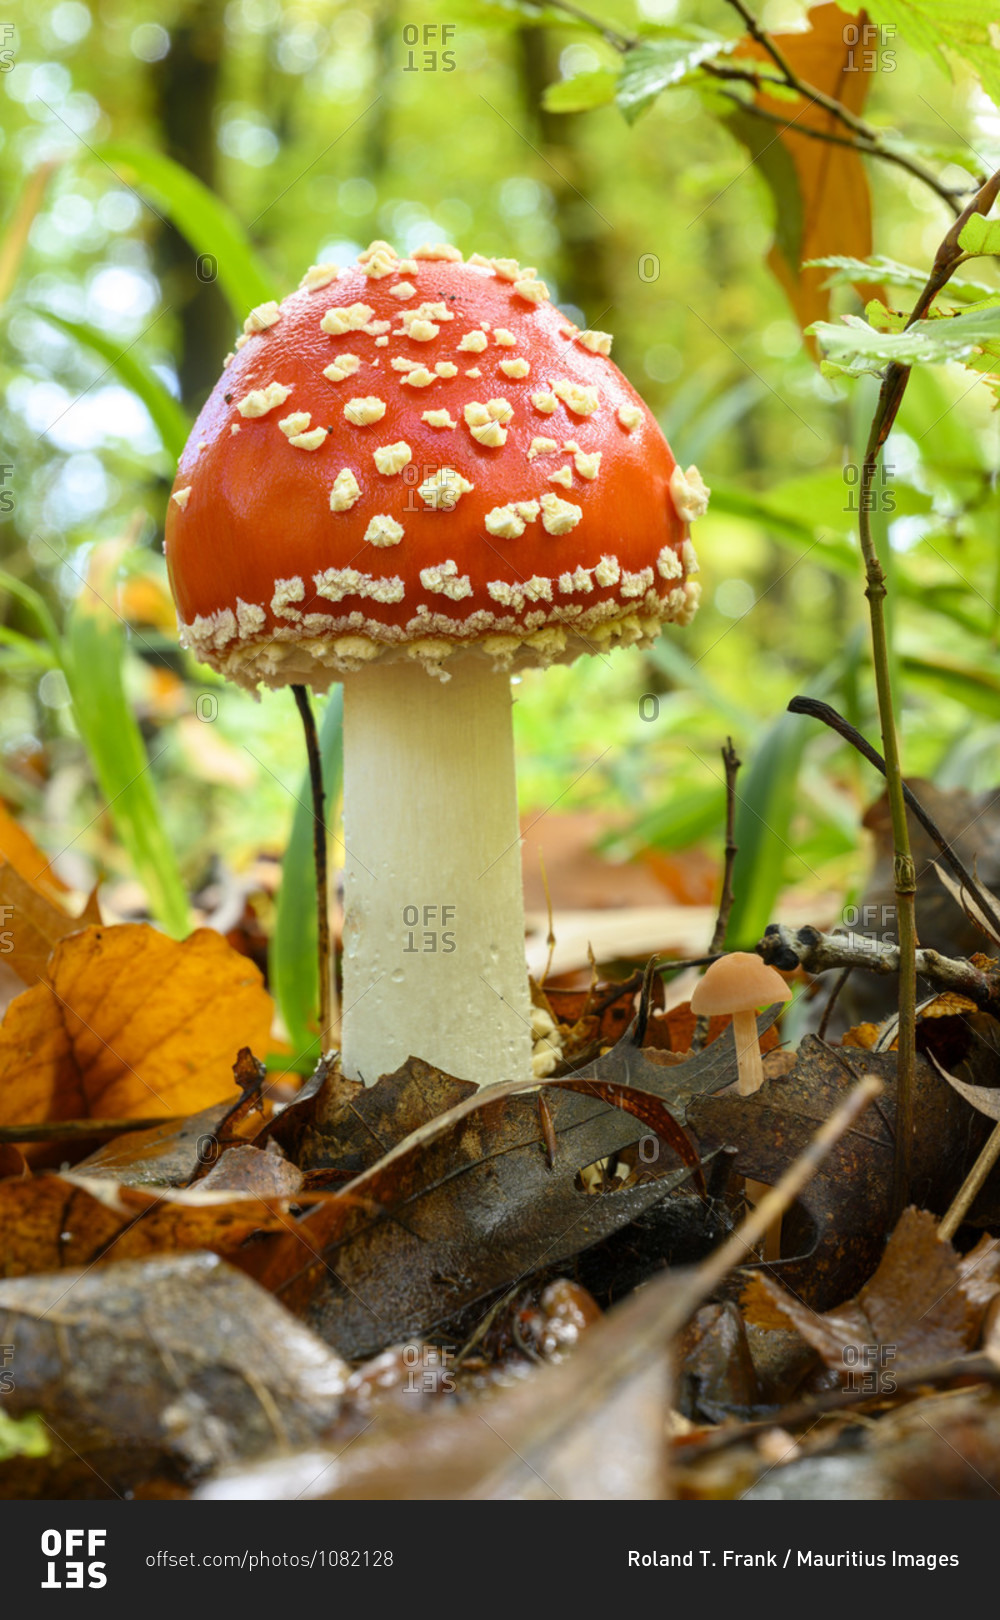 Toadstool (Amanita muscaria), red toadstool, poisonous
mushroom species. stock photo - OFFSET